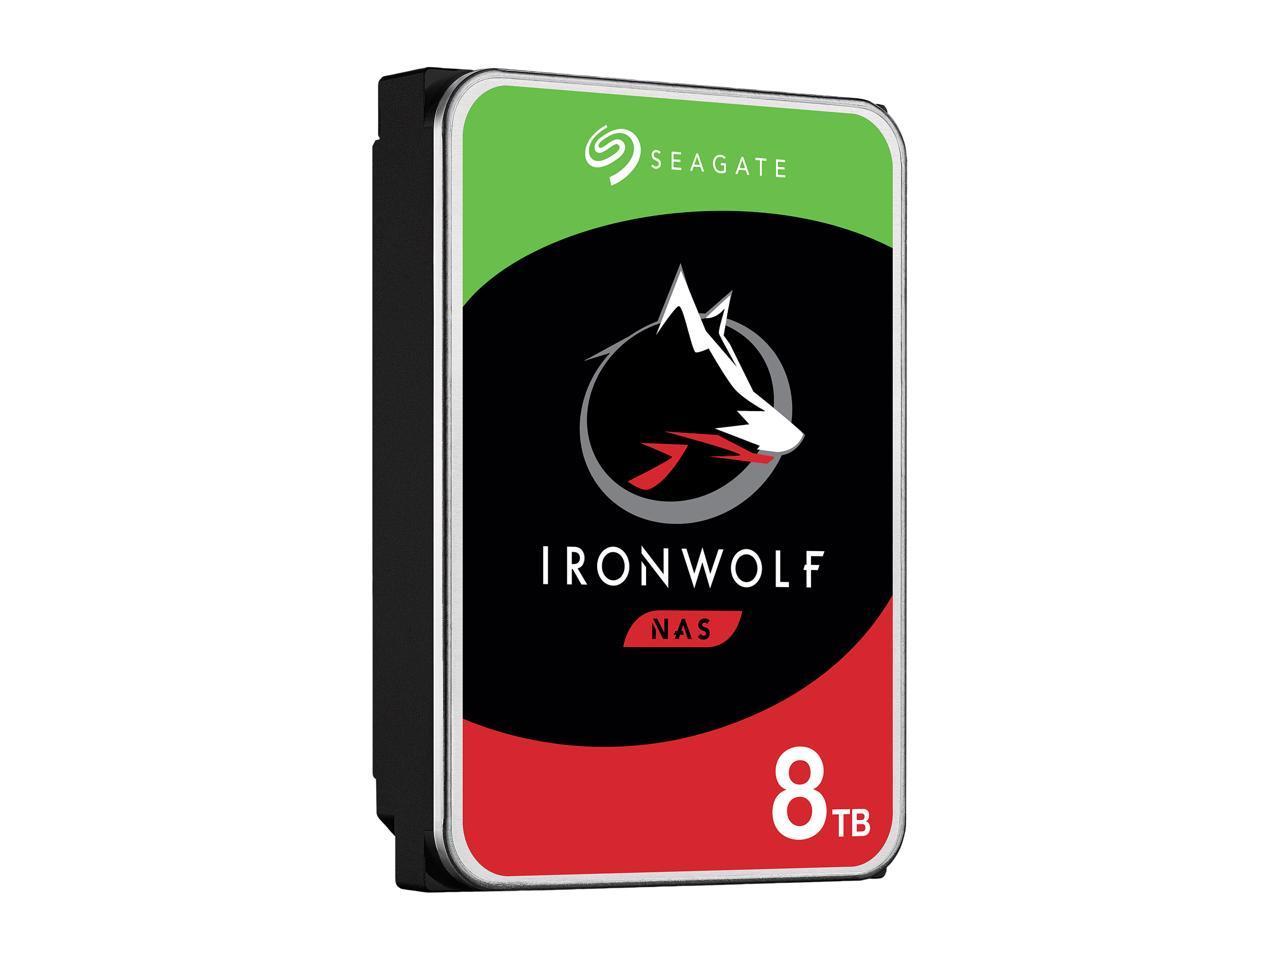 Хард диск SEAGATE IronWolf ST8000VN004, 8TB, 256MB Cache, SATA 6.0Gb/s-3